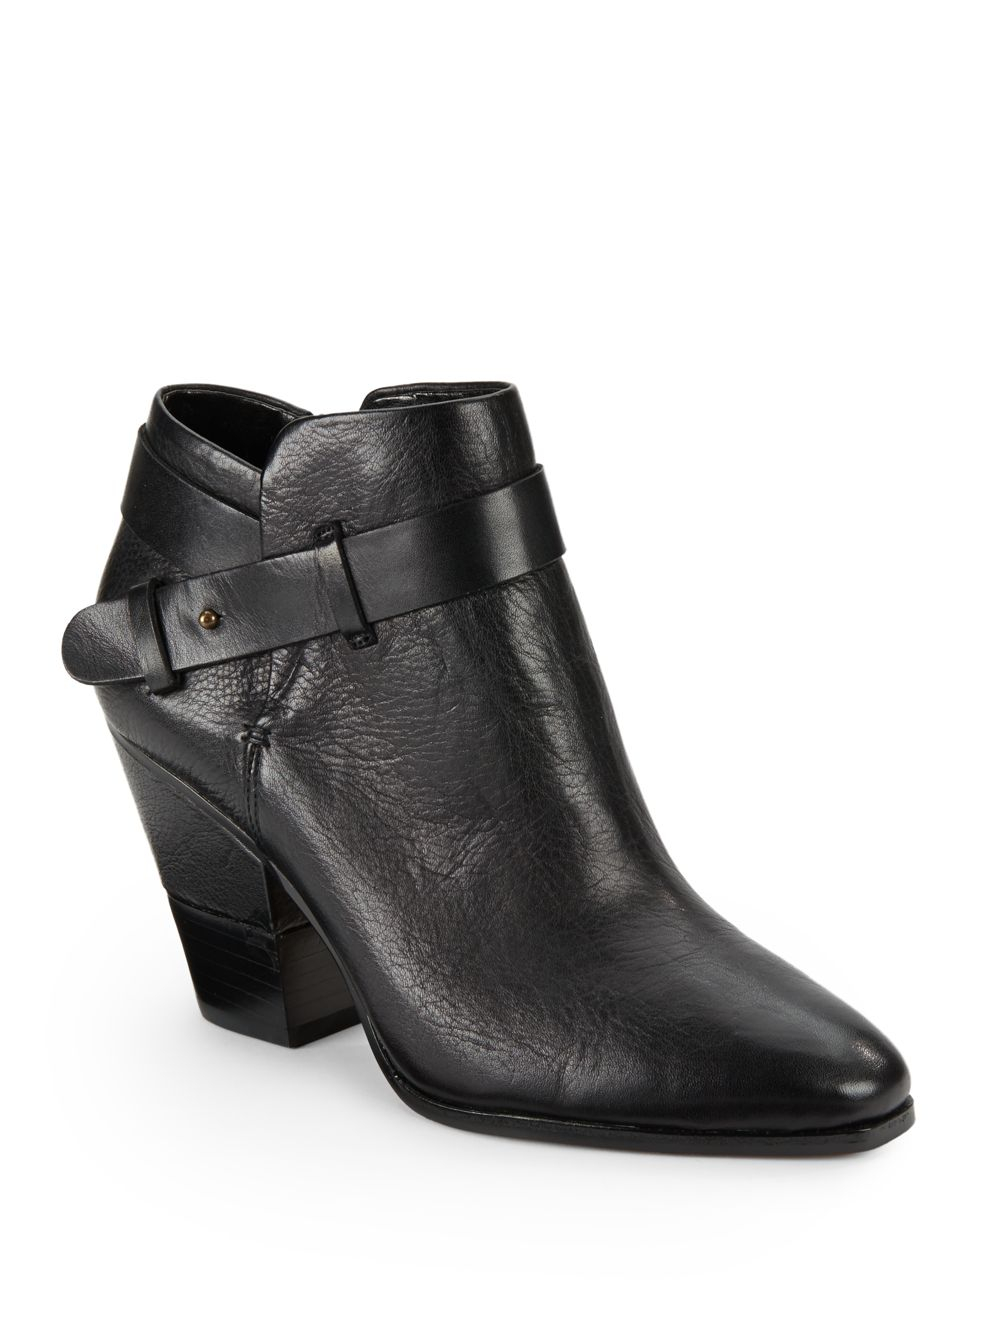 Dv By Dolce Vita Hilary Leather Ankle Boots in Black | Lyst